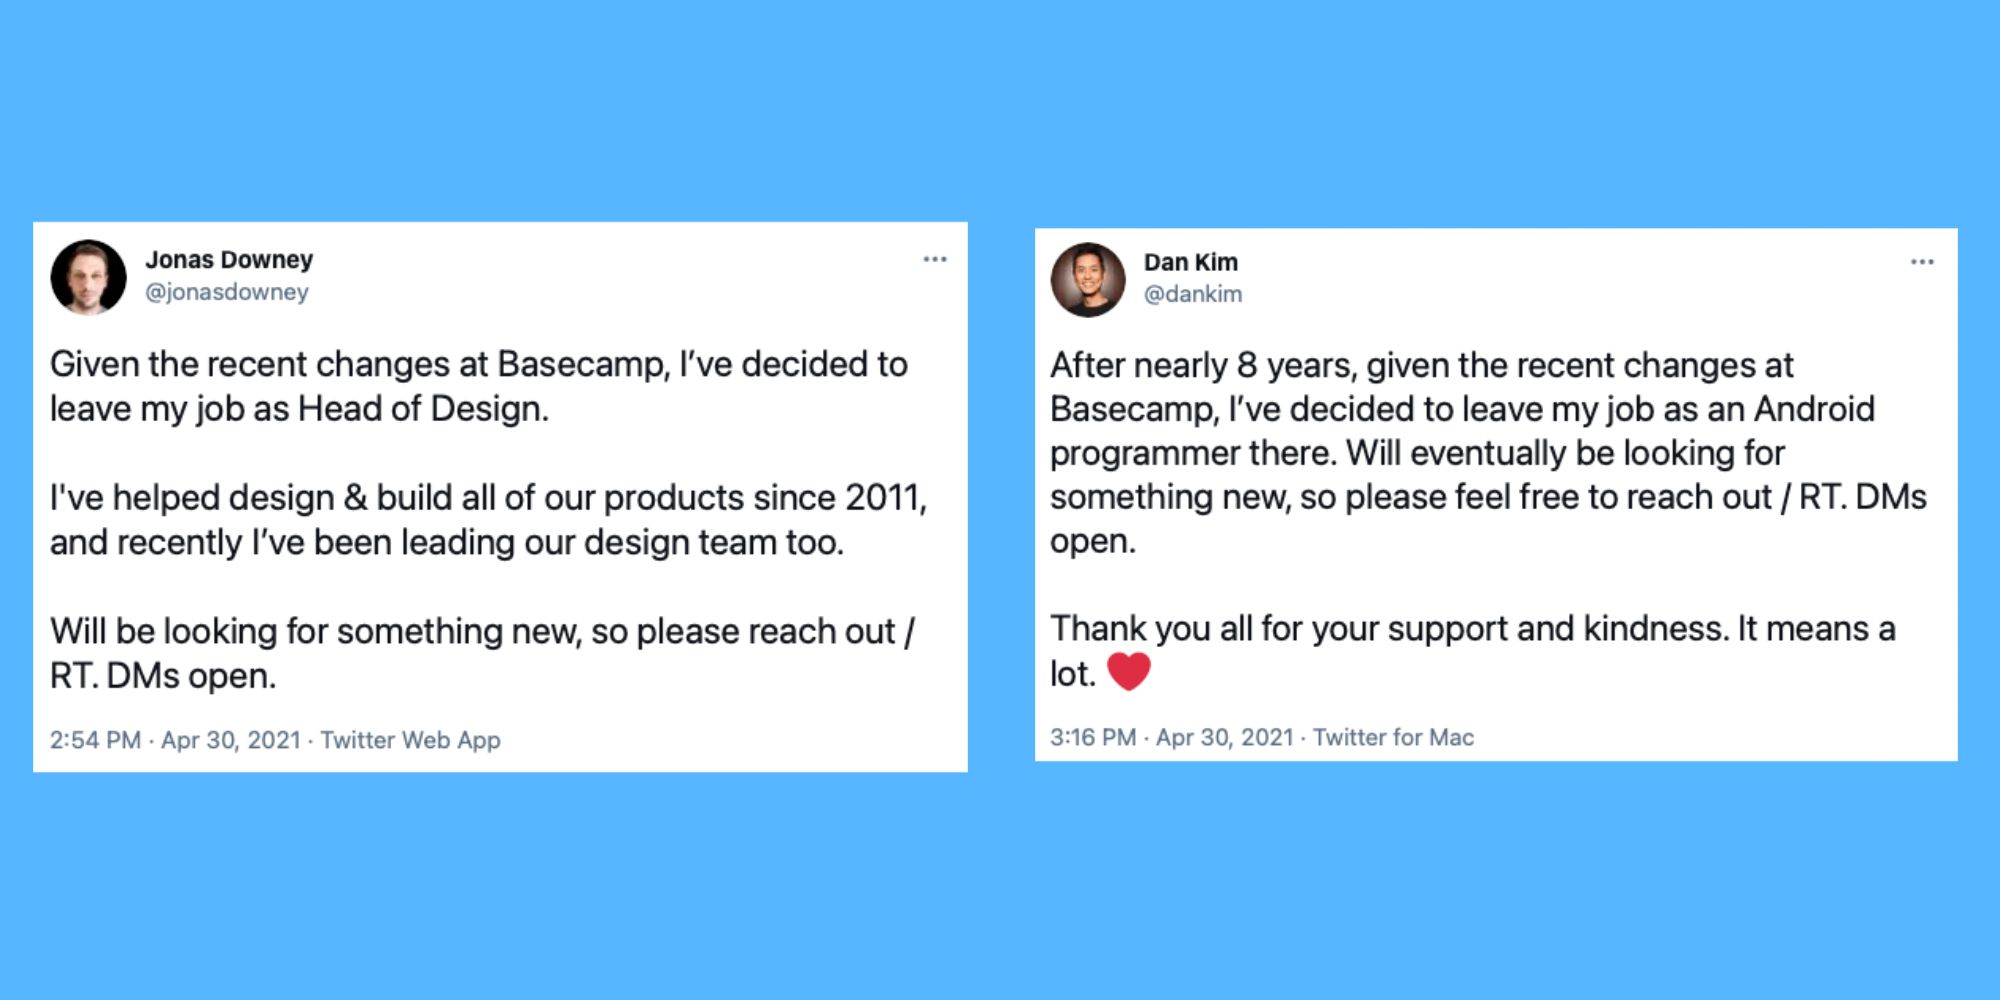 Tweets from Basecamp employees announcing their departure from the company